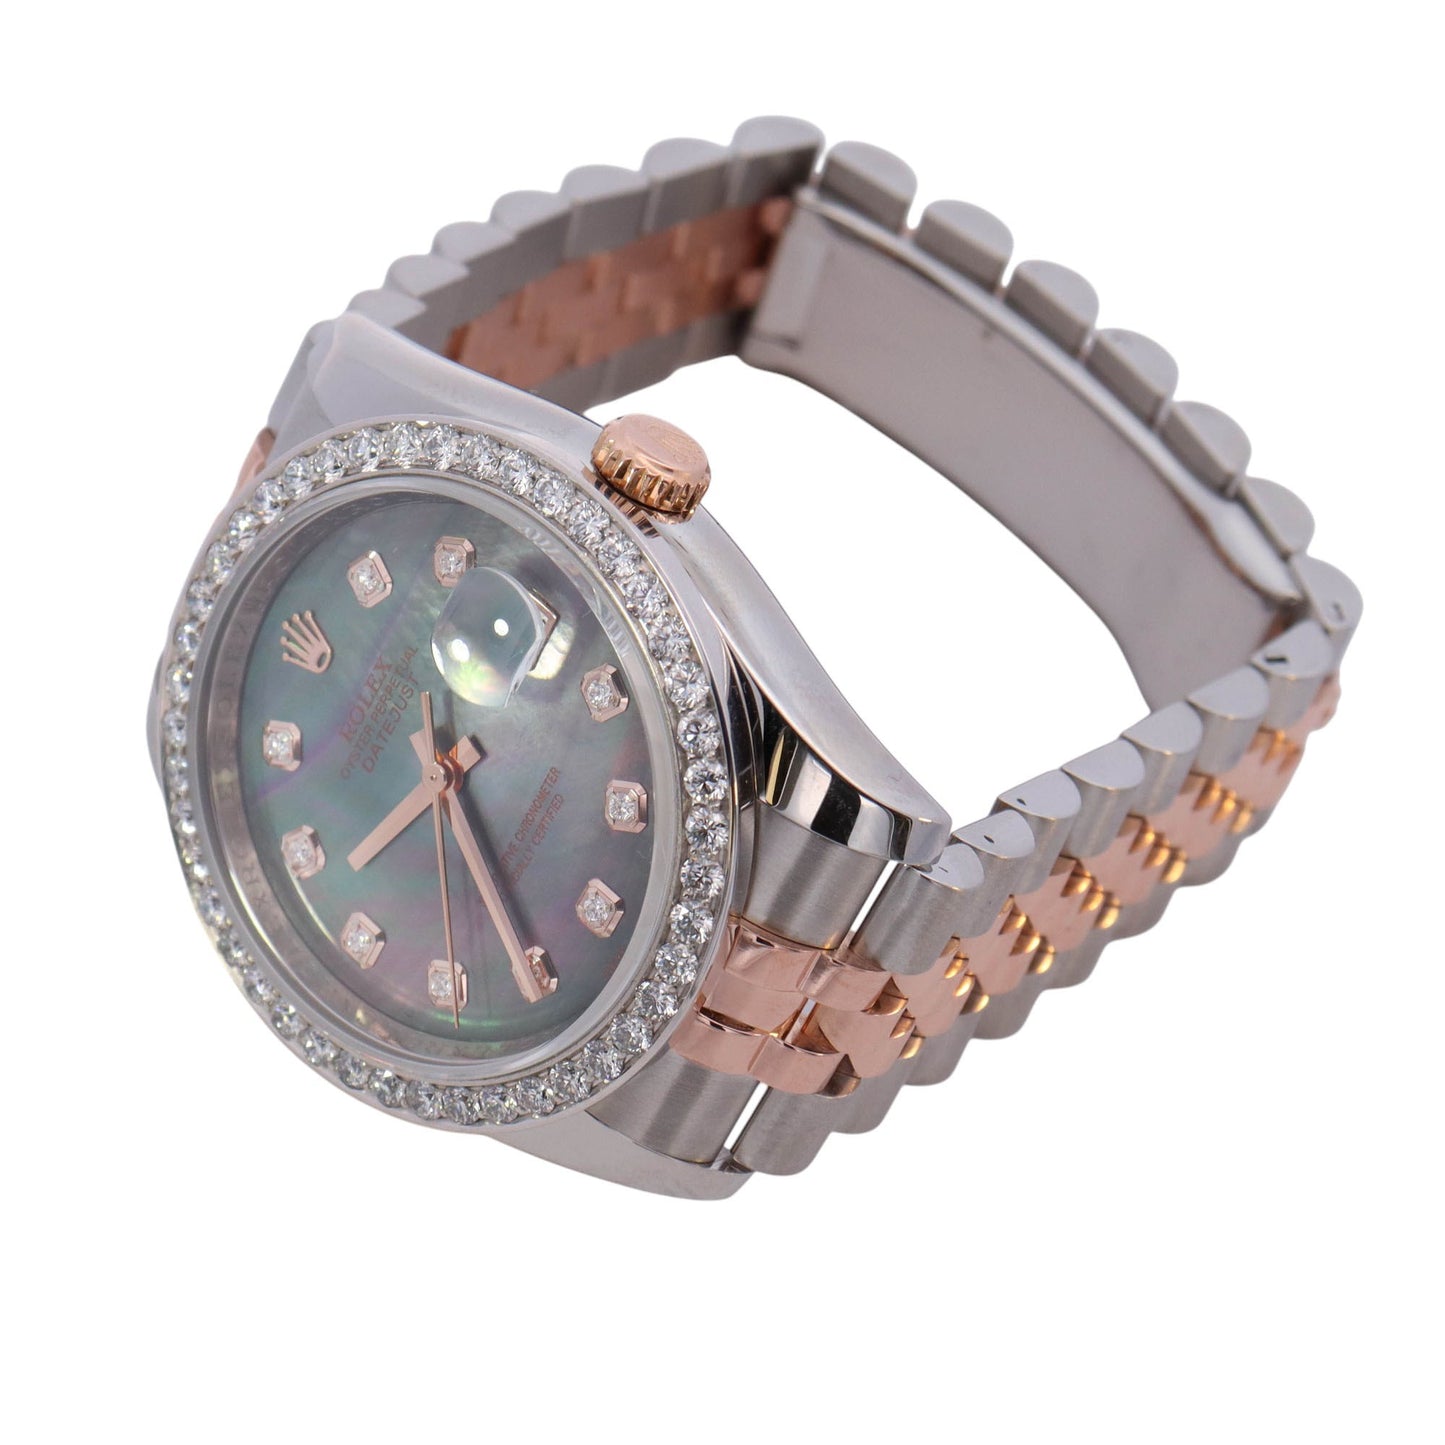 Rolex Datejust Two Tone Rose Gold & Stainless Steel 36mm Dark MOP Diamond Dial Watch Reference #: 116231